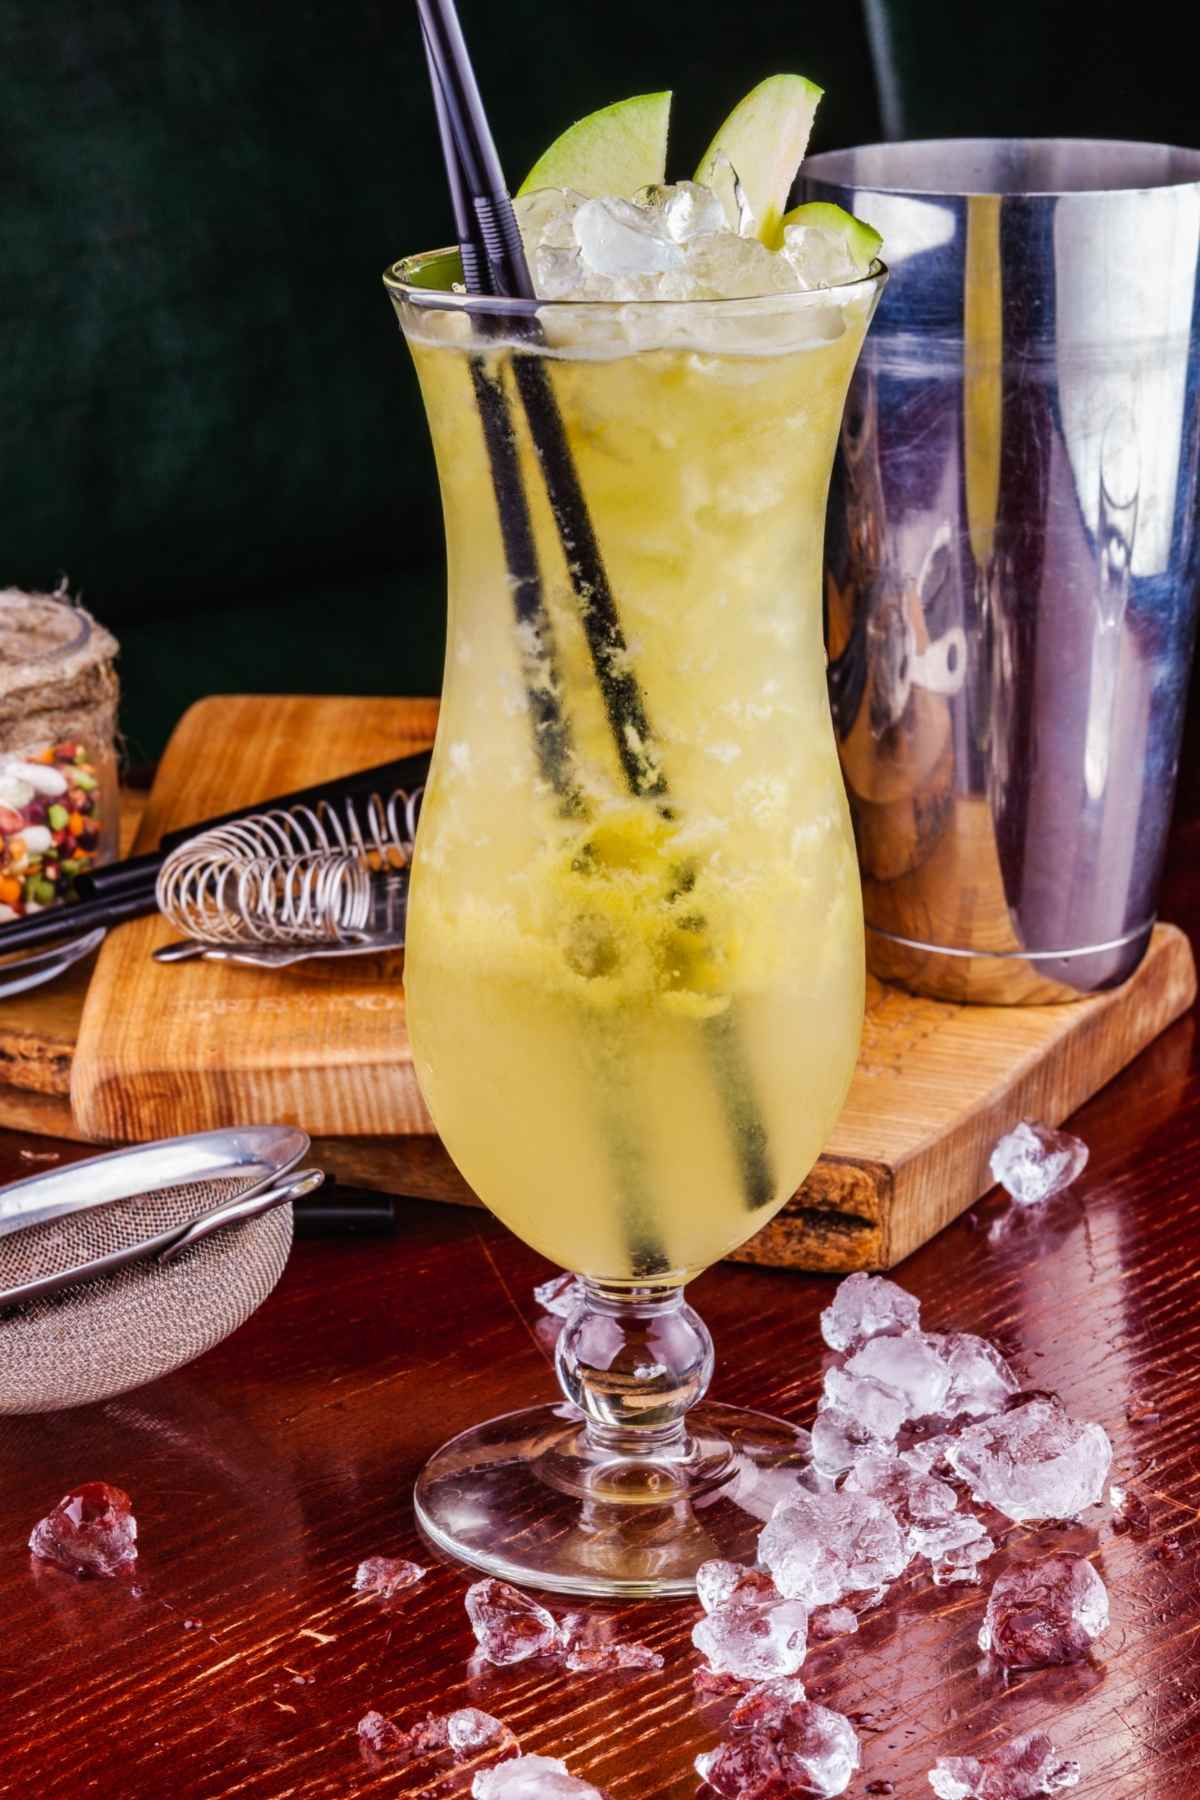 Get Ready To Share This Pear Spritzer! — Tribe’s CBD Pear Collins Recipe 